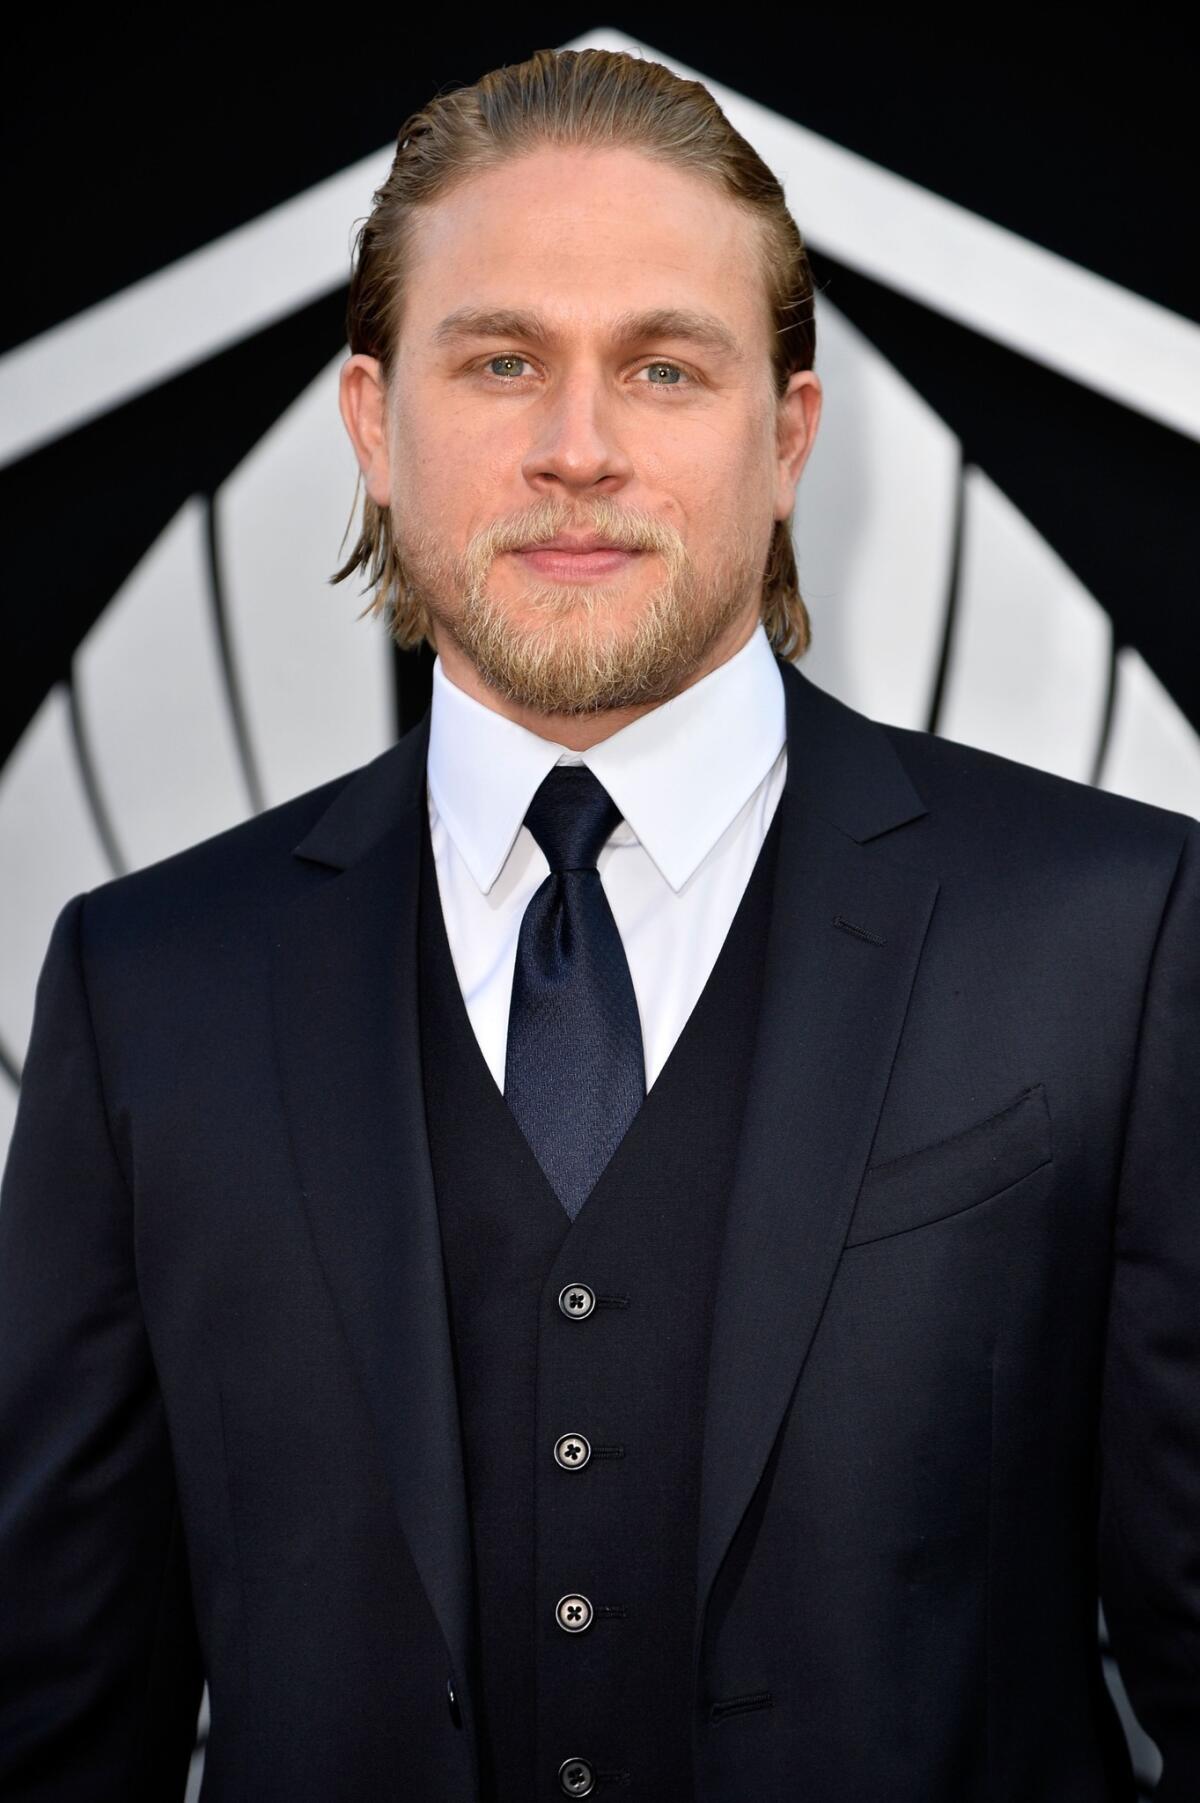 Actor Charlie Hunnam has dropped out of the film "Fifty Shades of Grey."